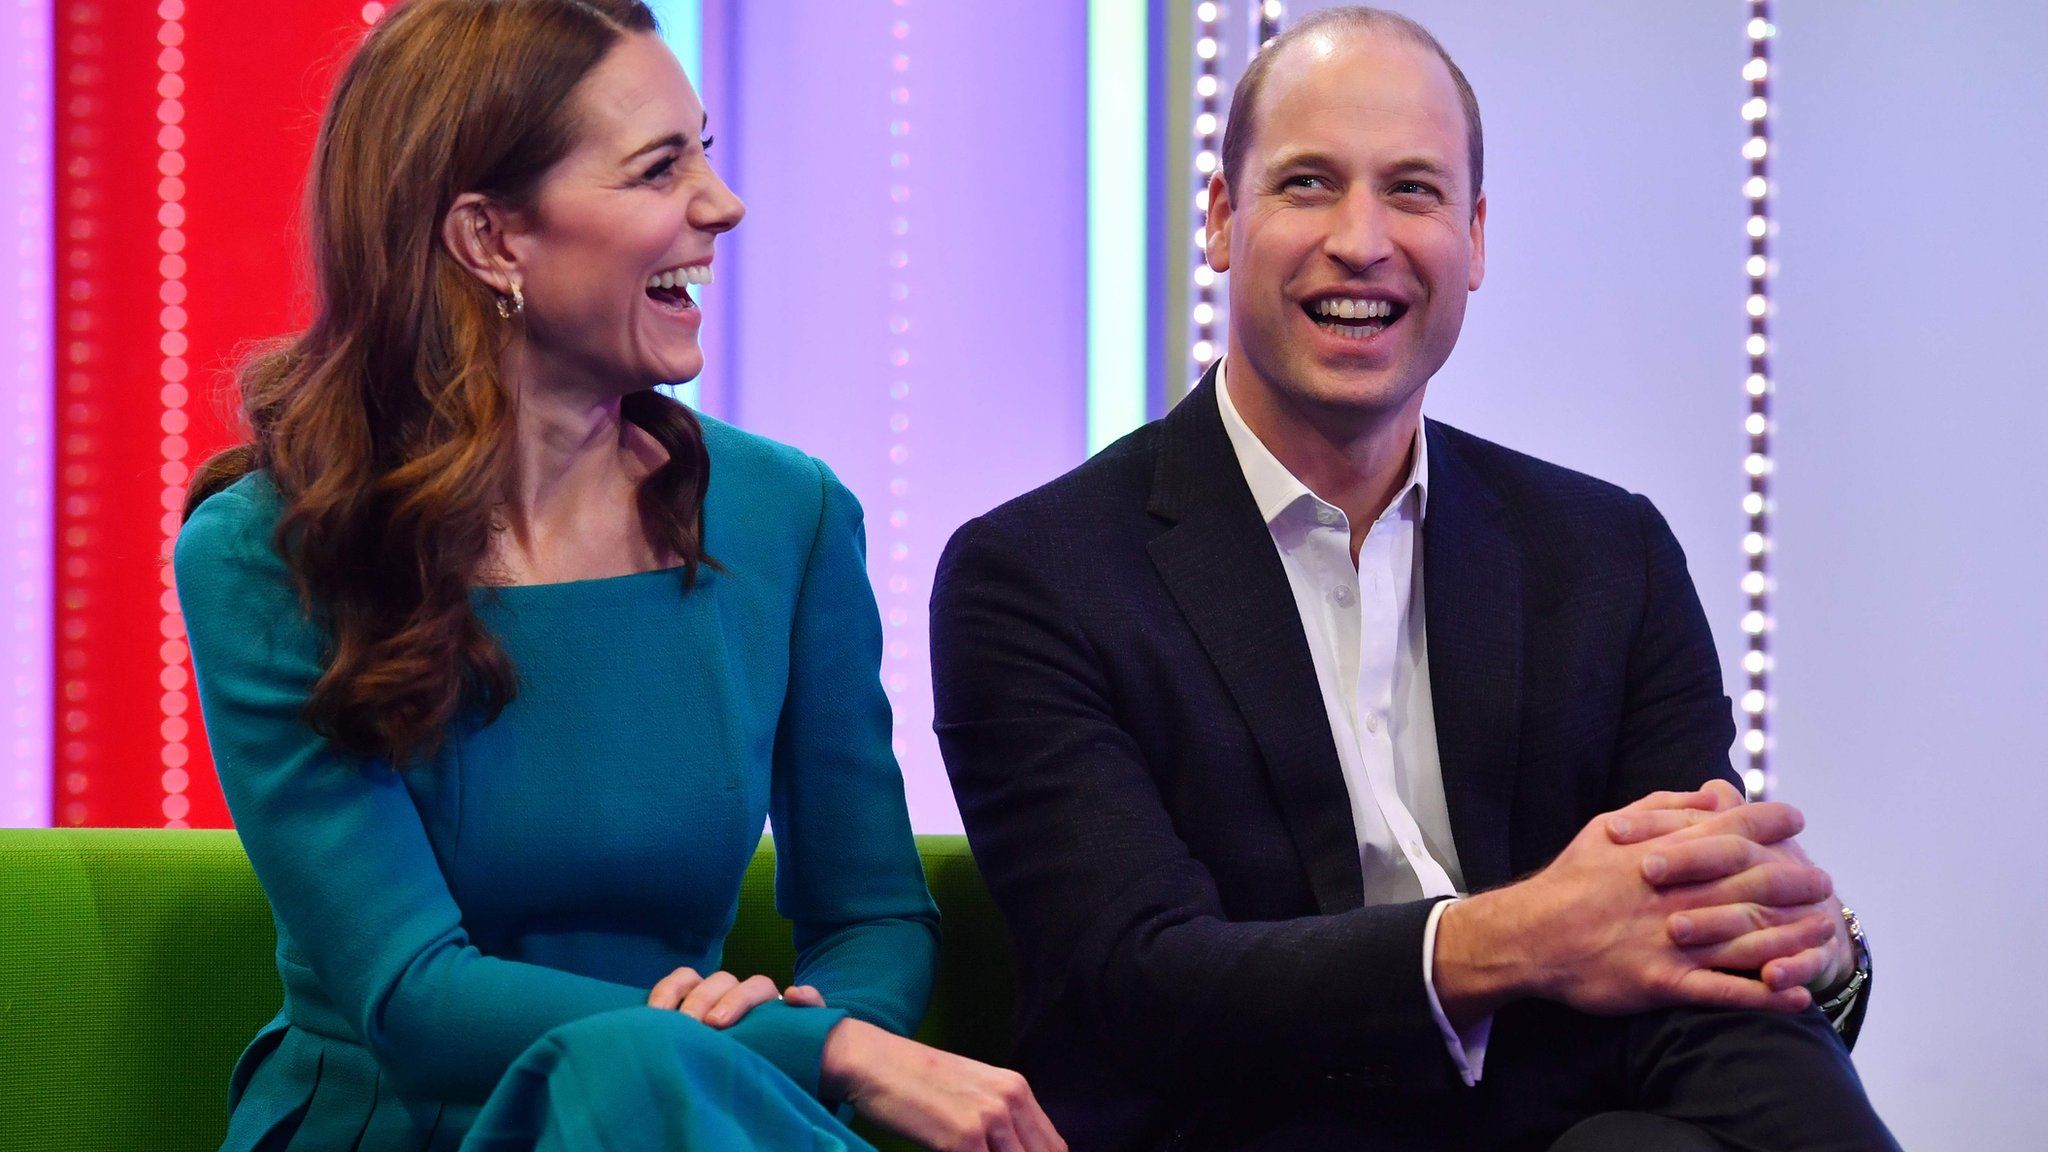 The royals on the One Show sofa